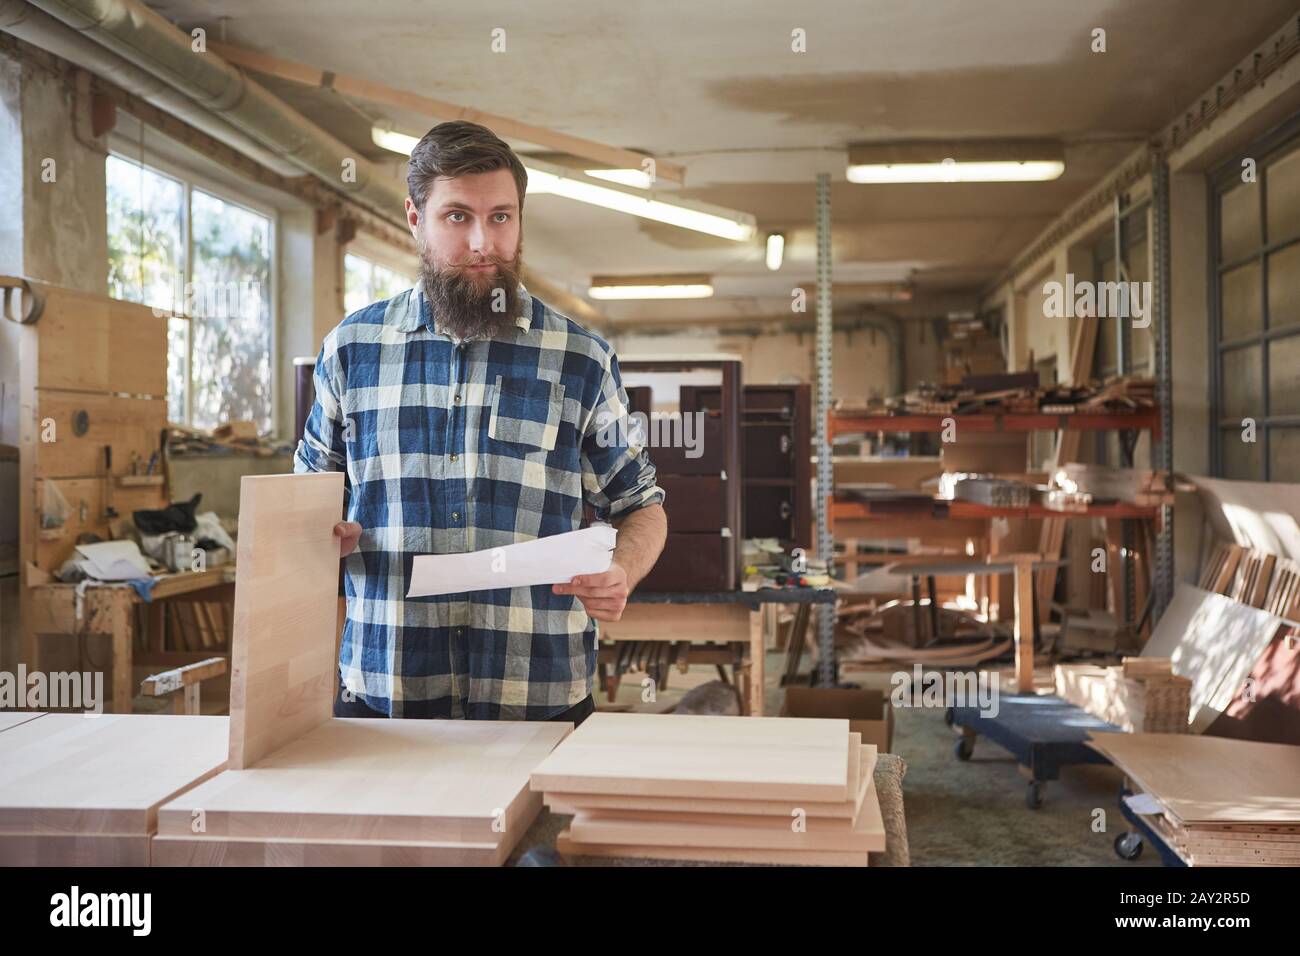 Furniture maker with shelves and checklist for ordering in the carpentry Stock Photo